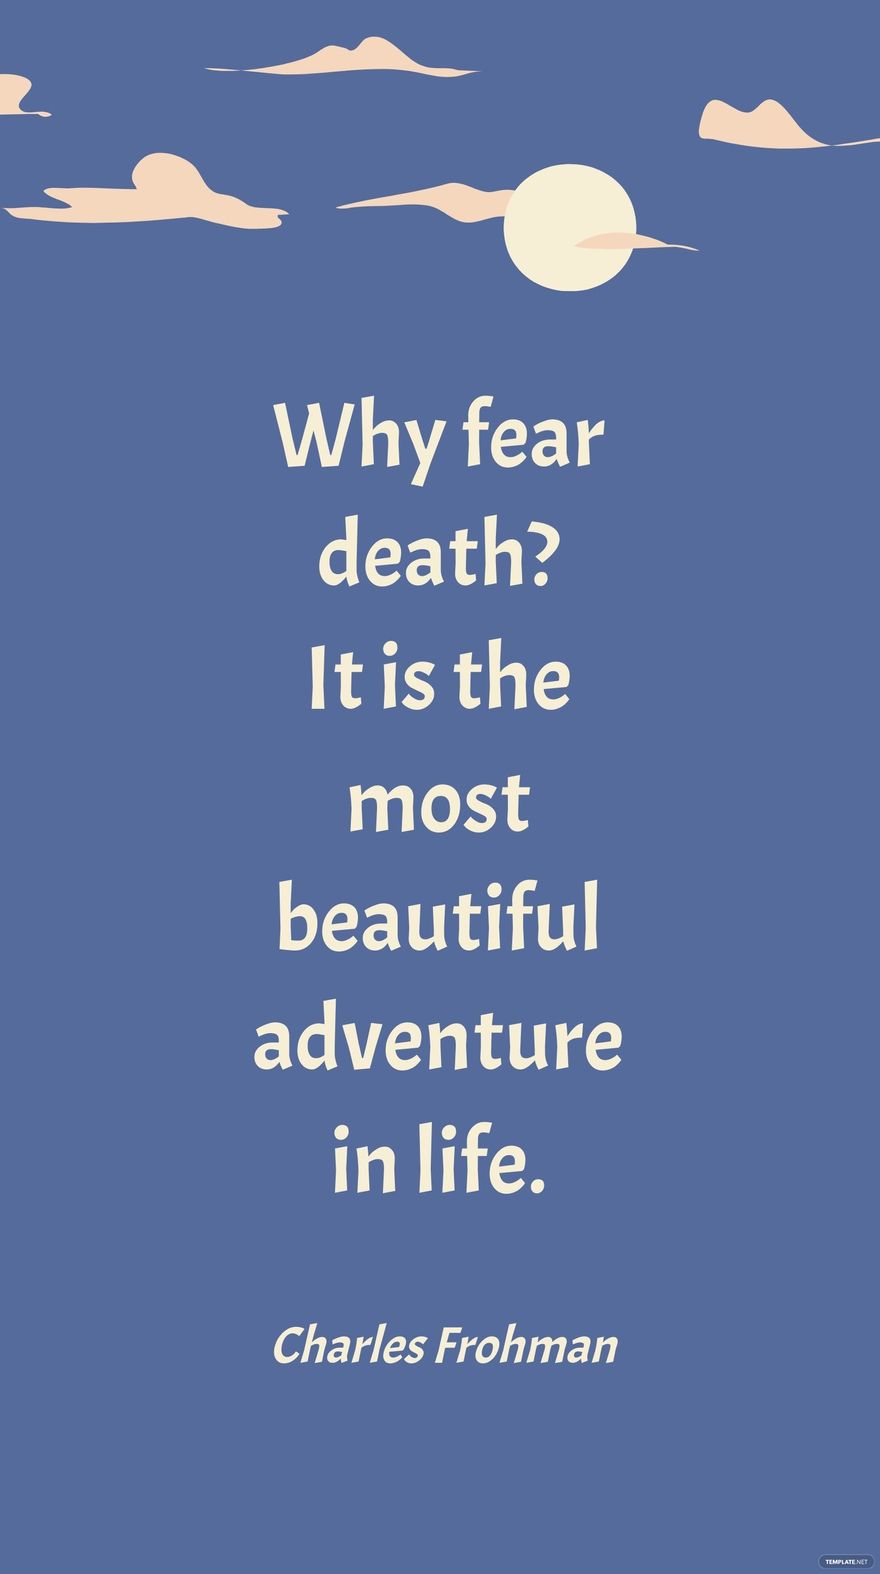 Charles Frohman - Why fear death? It is the most beautiful adventure in life. in JPG